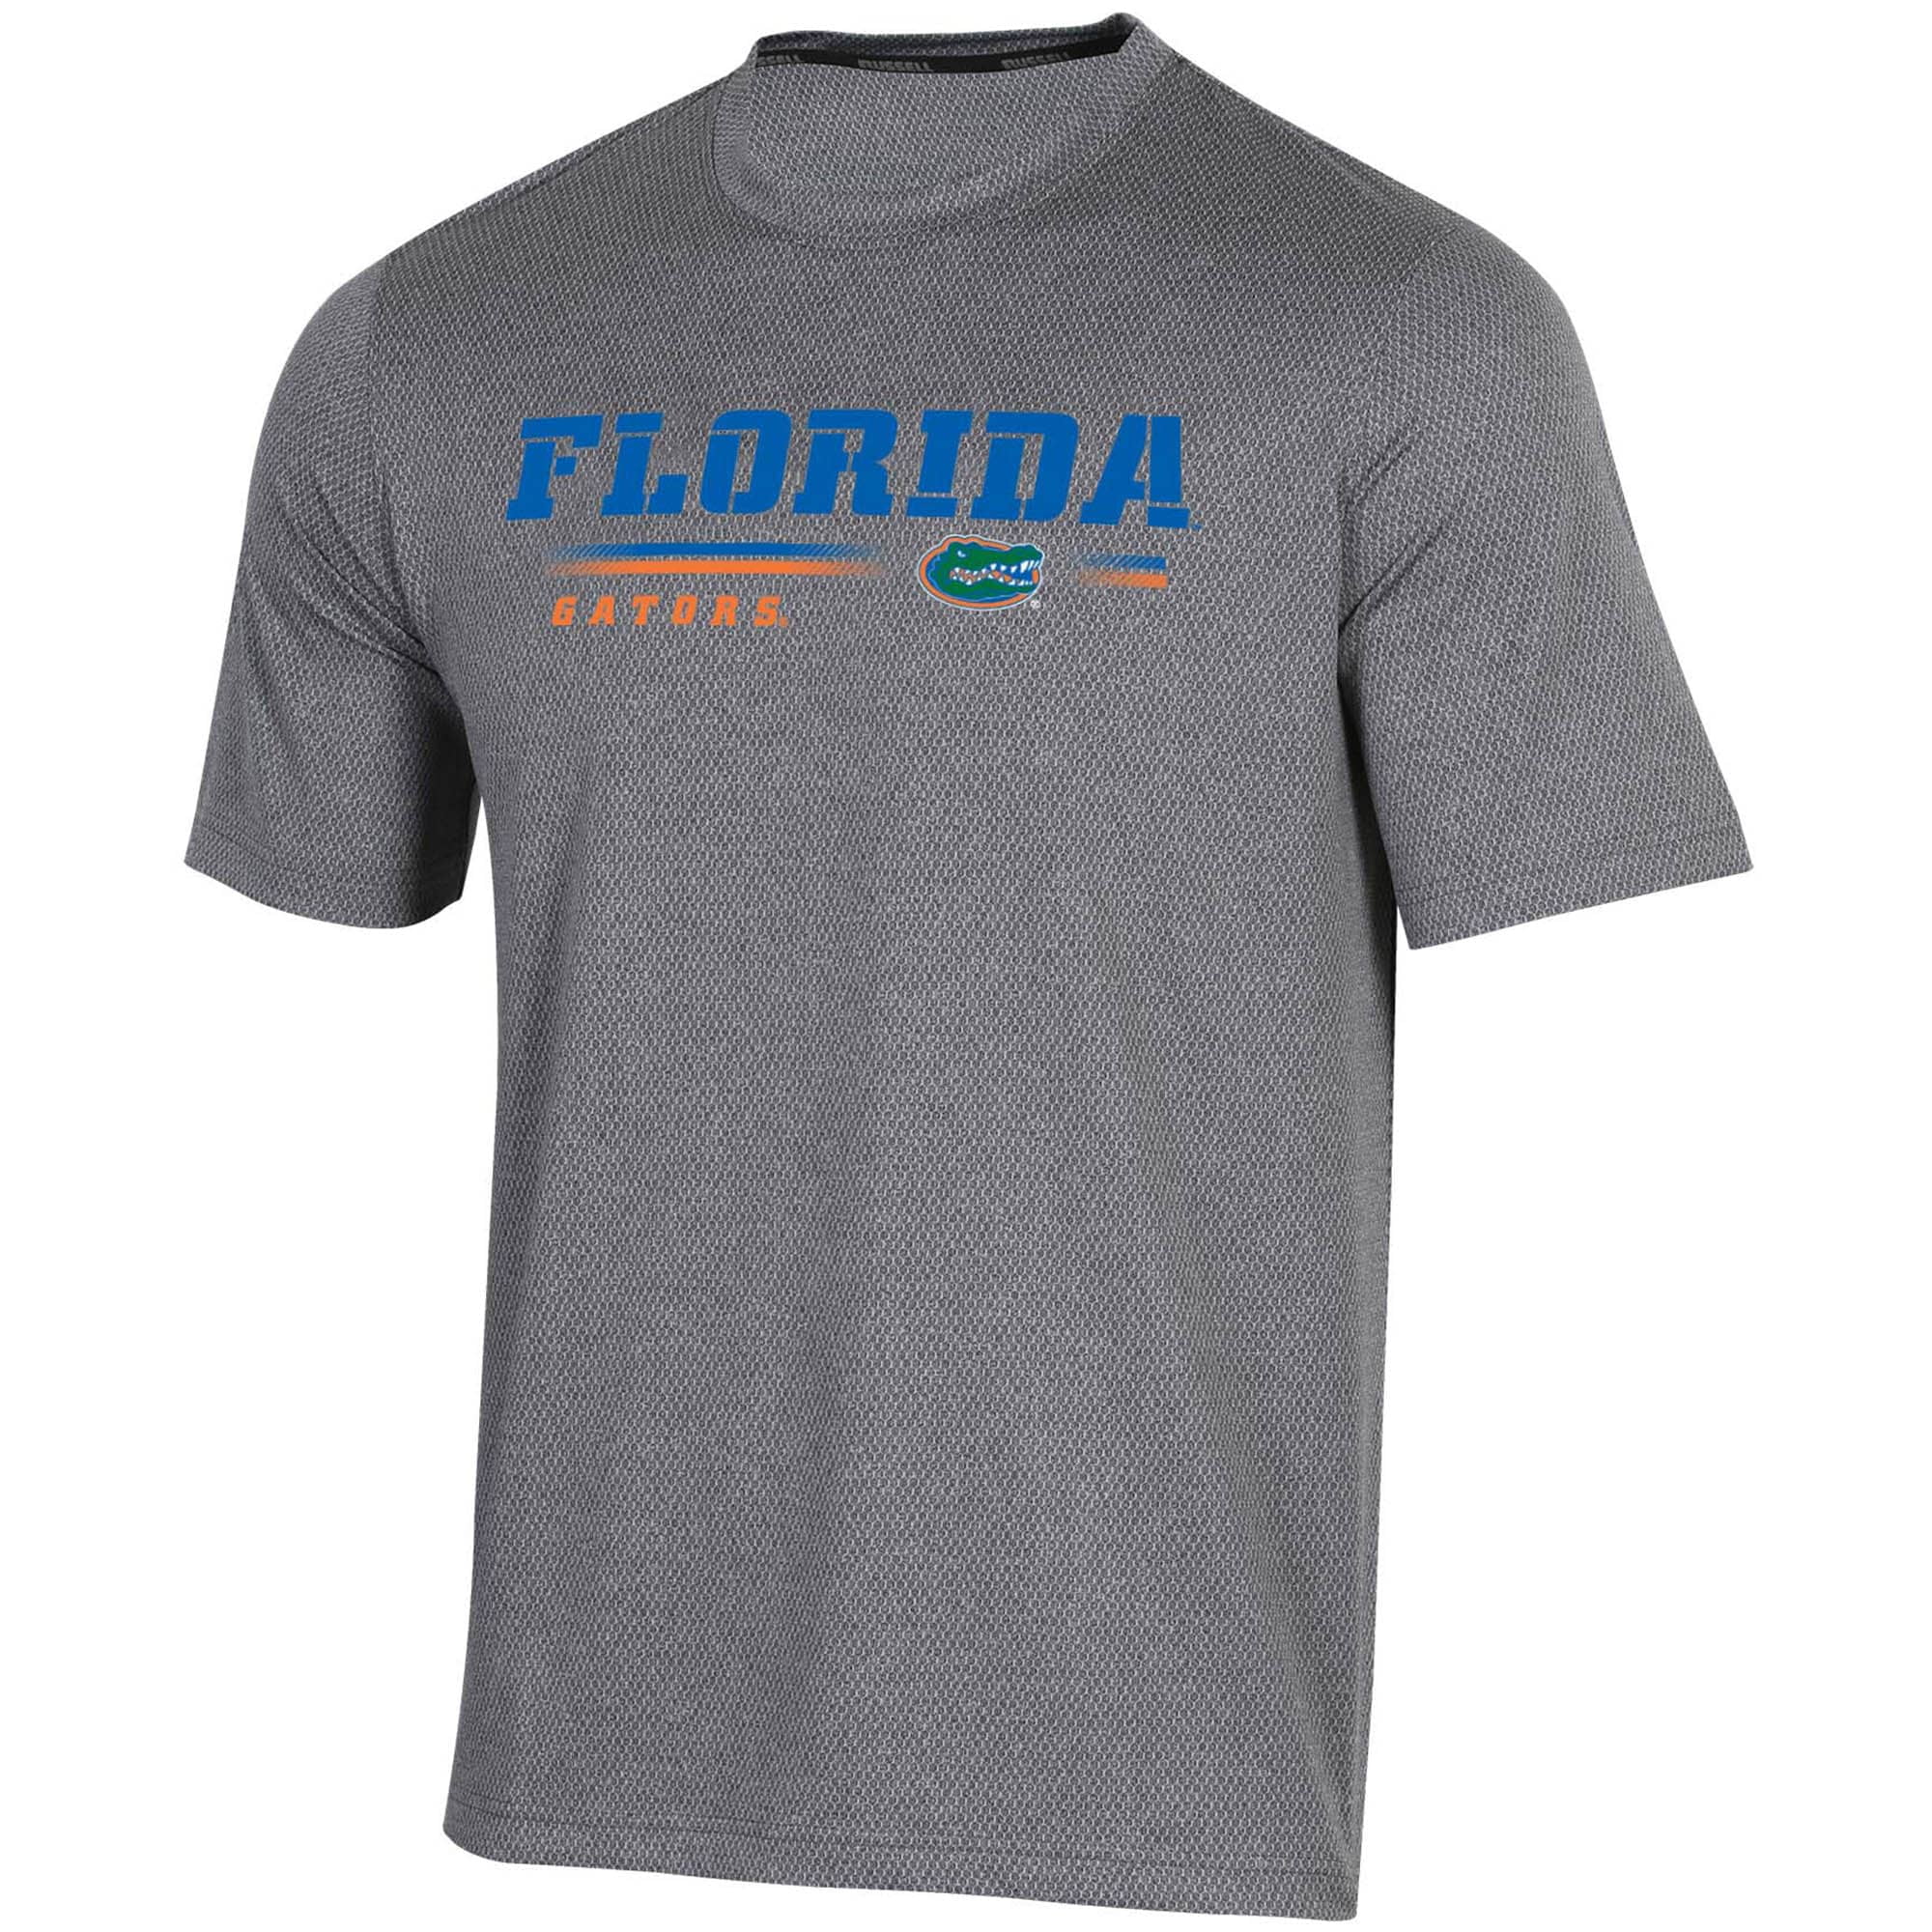 Florida Gators Russell Athletic Practice Jersey